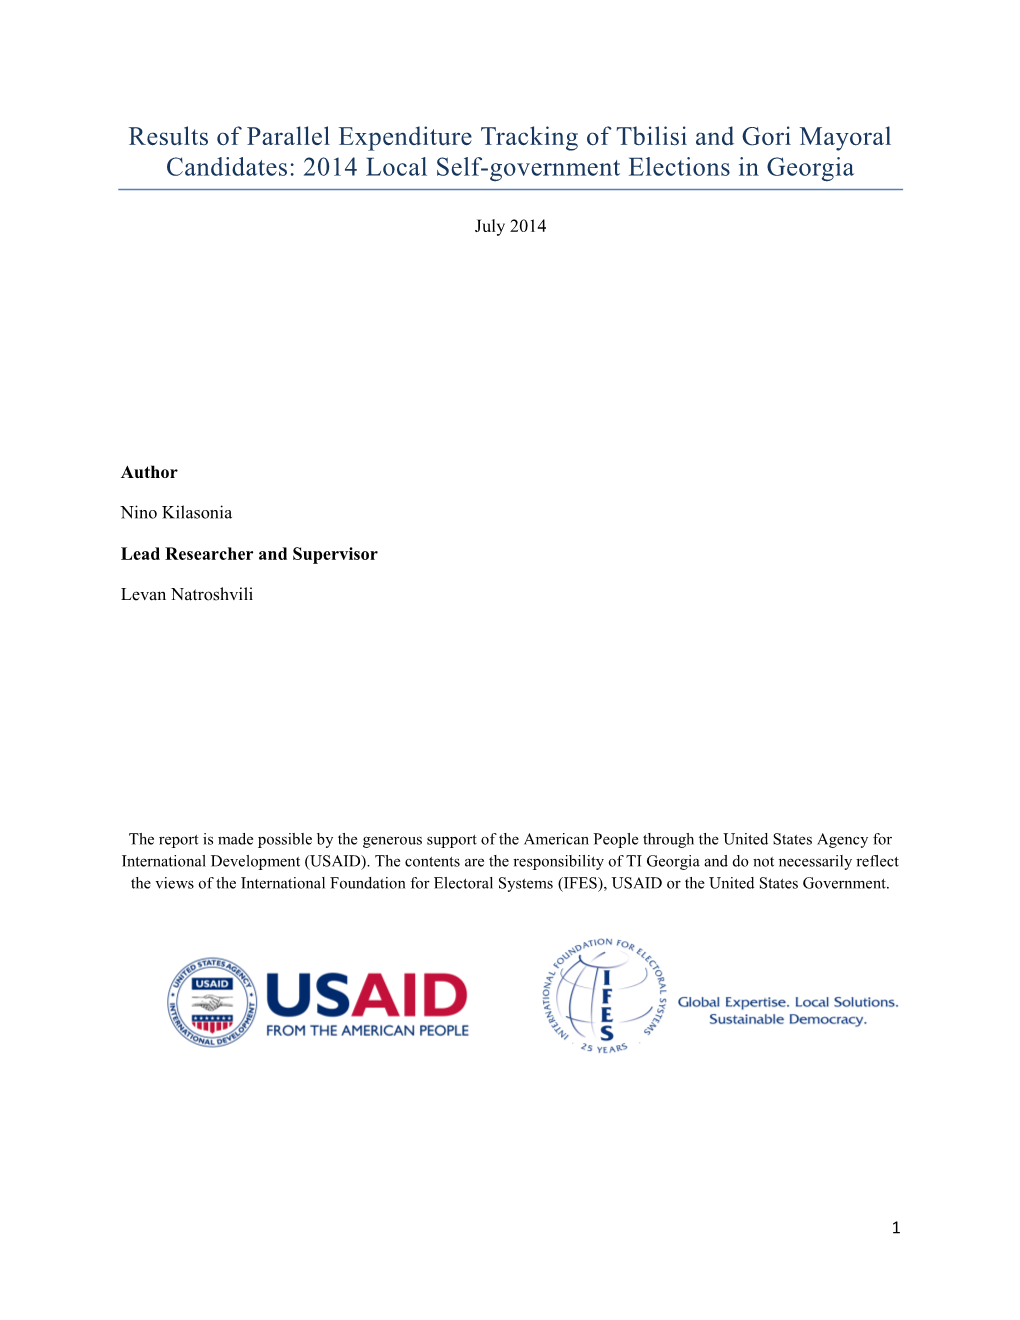 Results of Parallel Expenditure Tracking of Tbilisi and Gori Mayoral Candidates: 2014 Local Self-Government Elections in Georgia